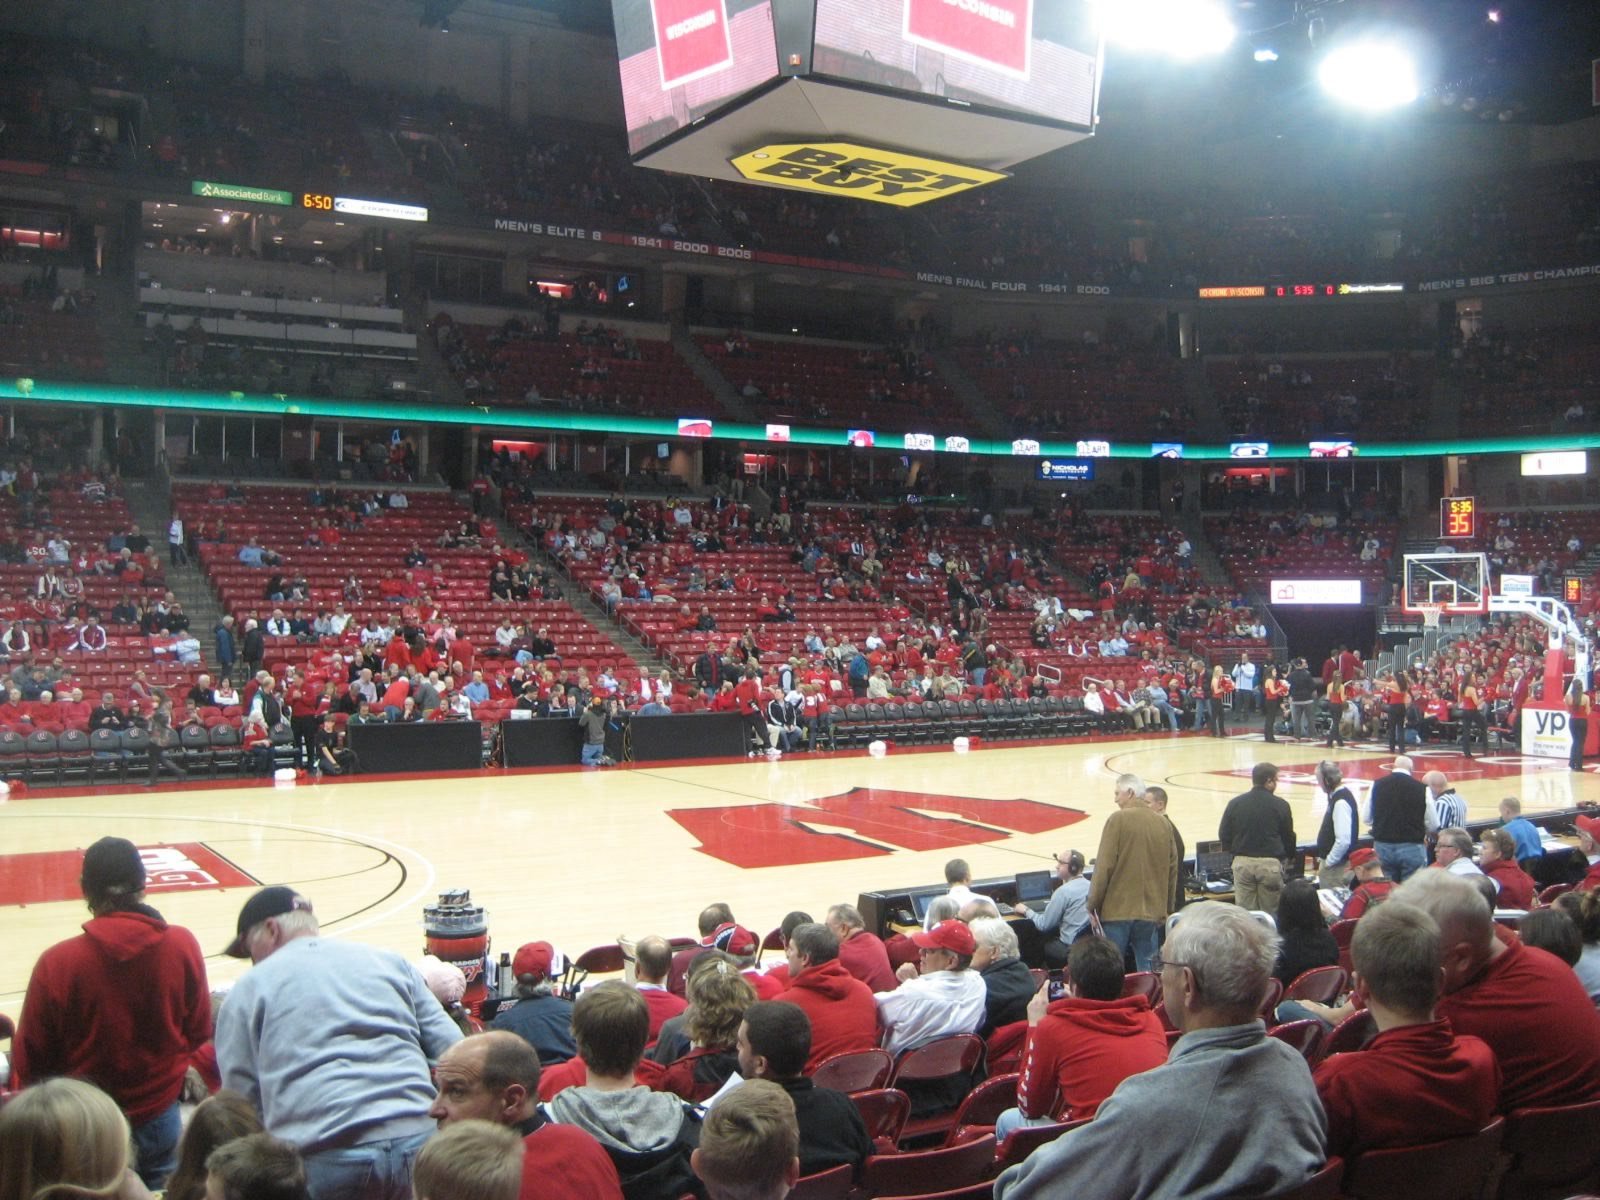 Kohl Center Wi Seating Chart Rows